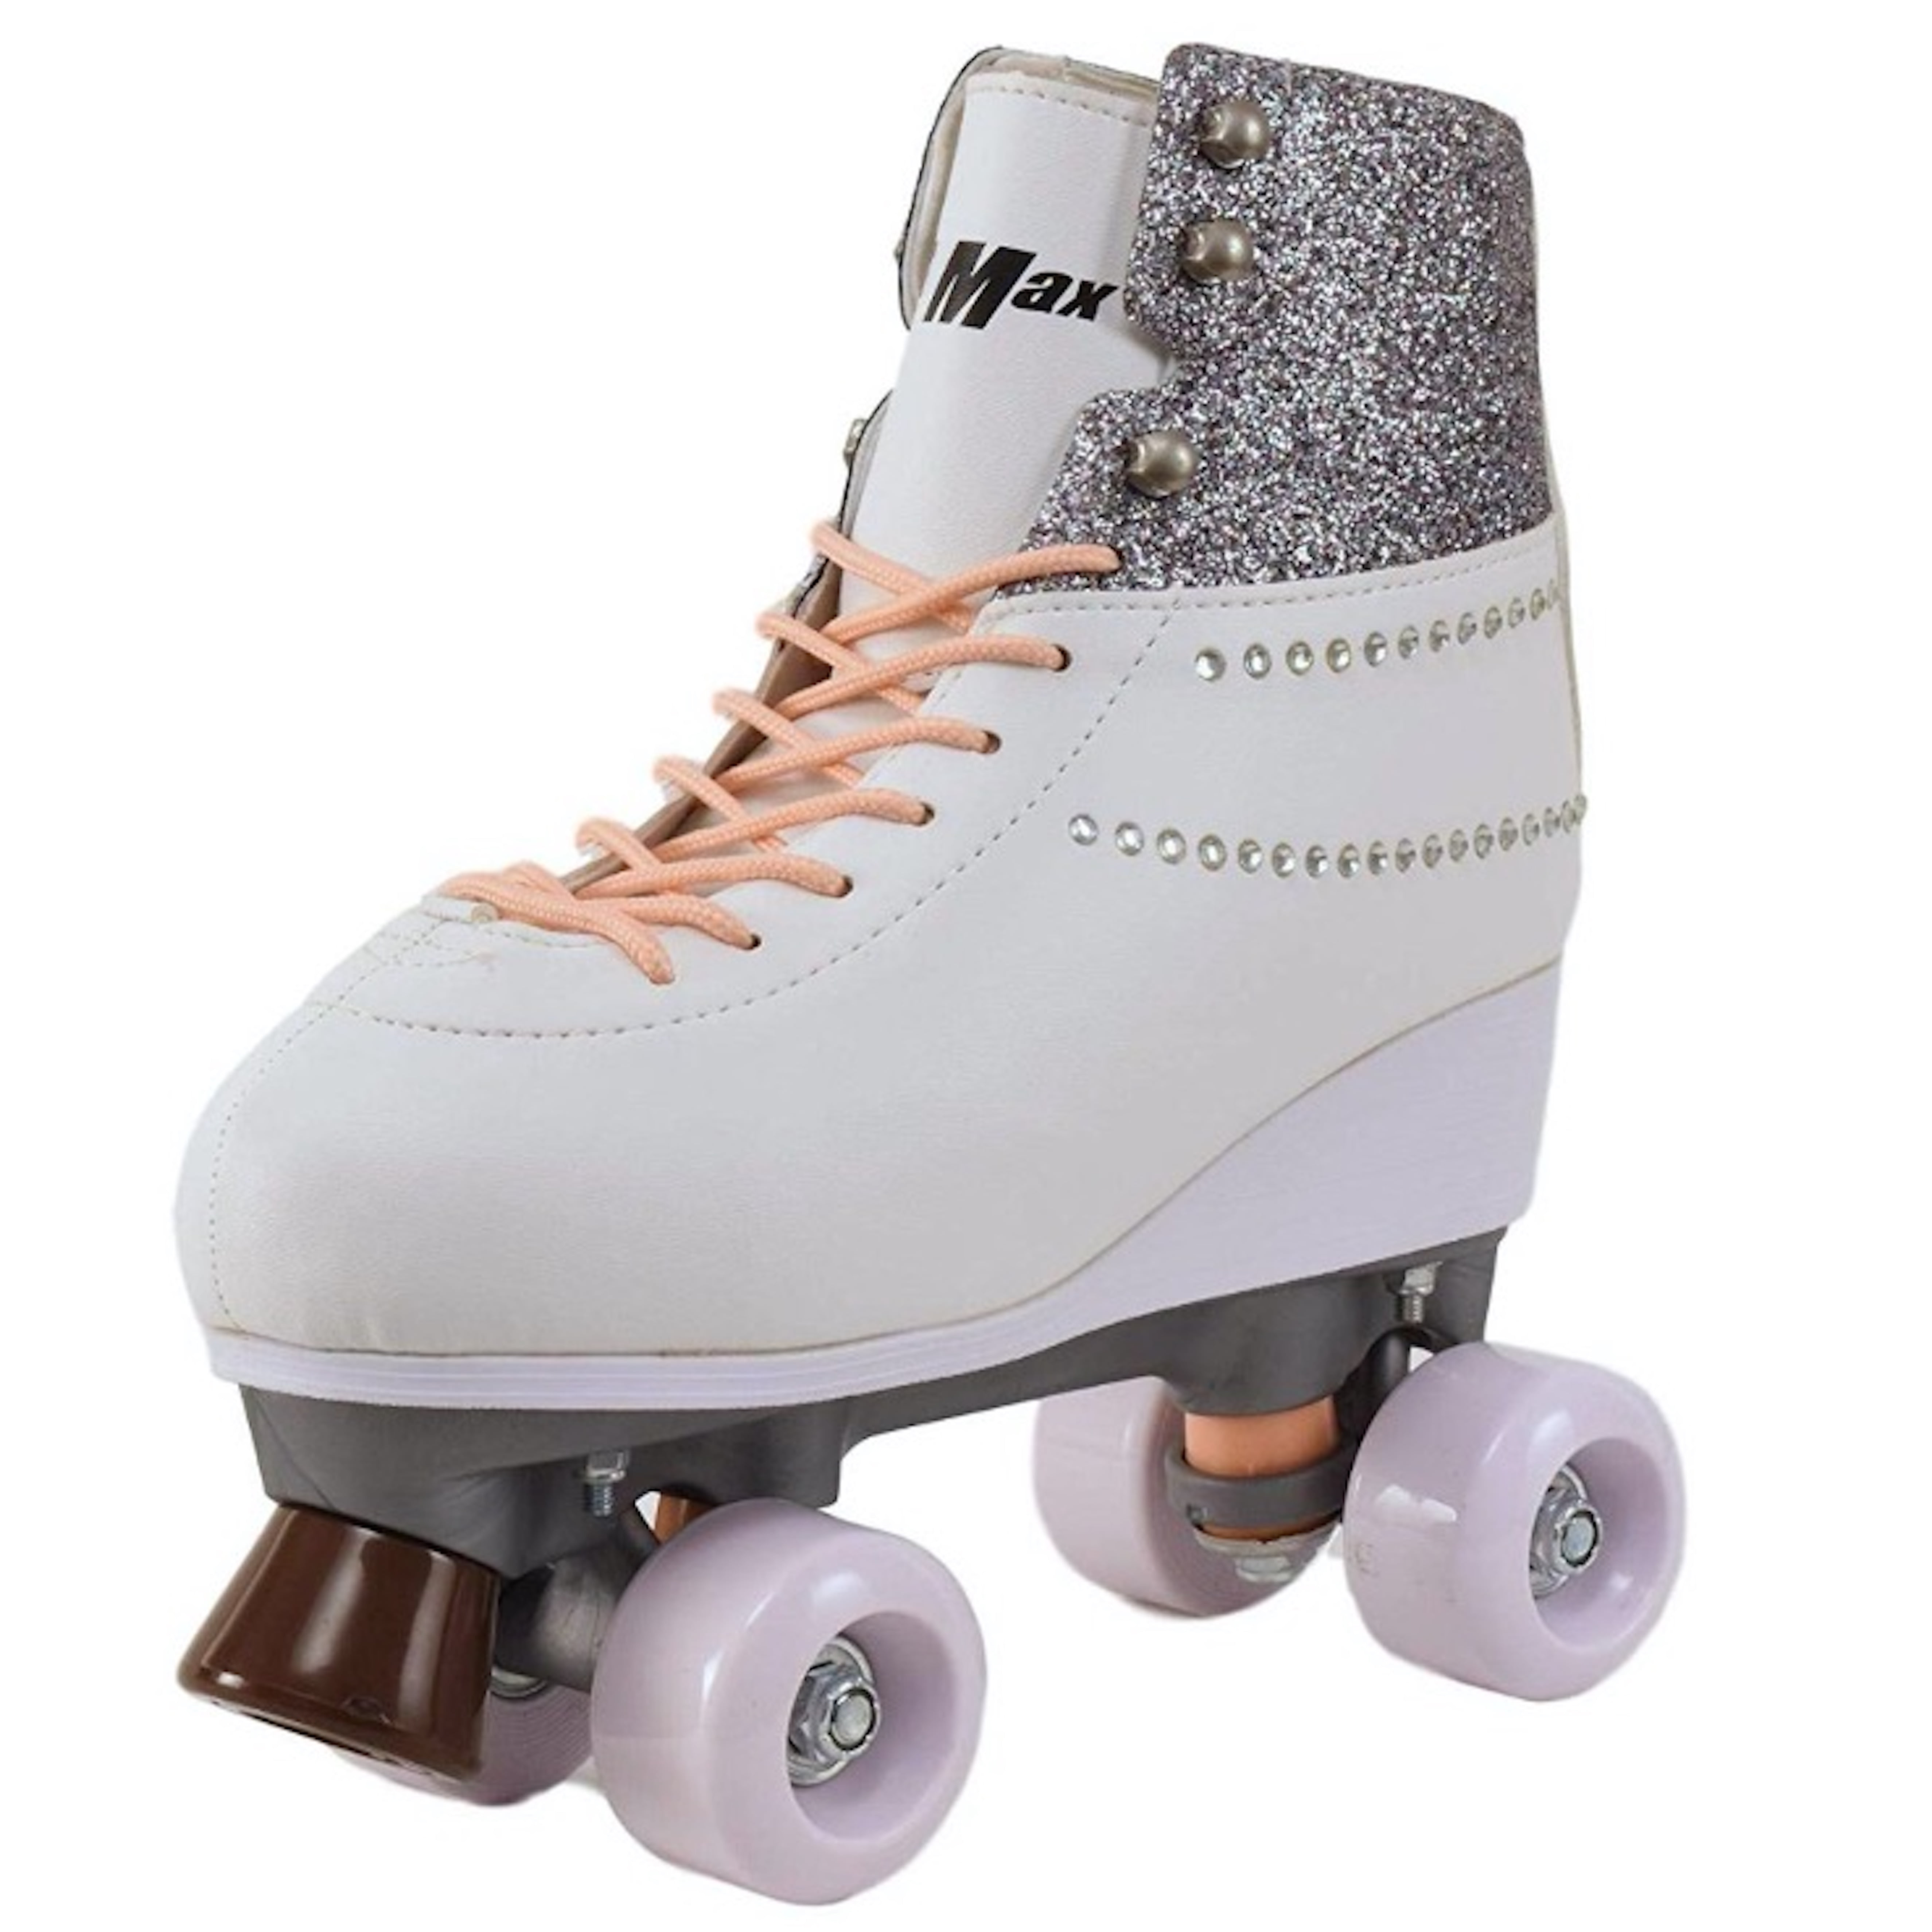 Stmax Quad Roller Skates for Women White and Purple size 8 Adult 4-Wheels 